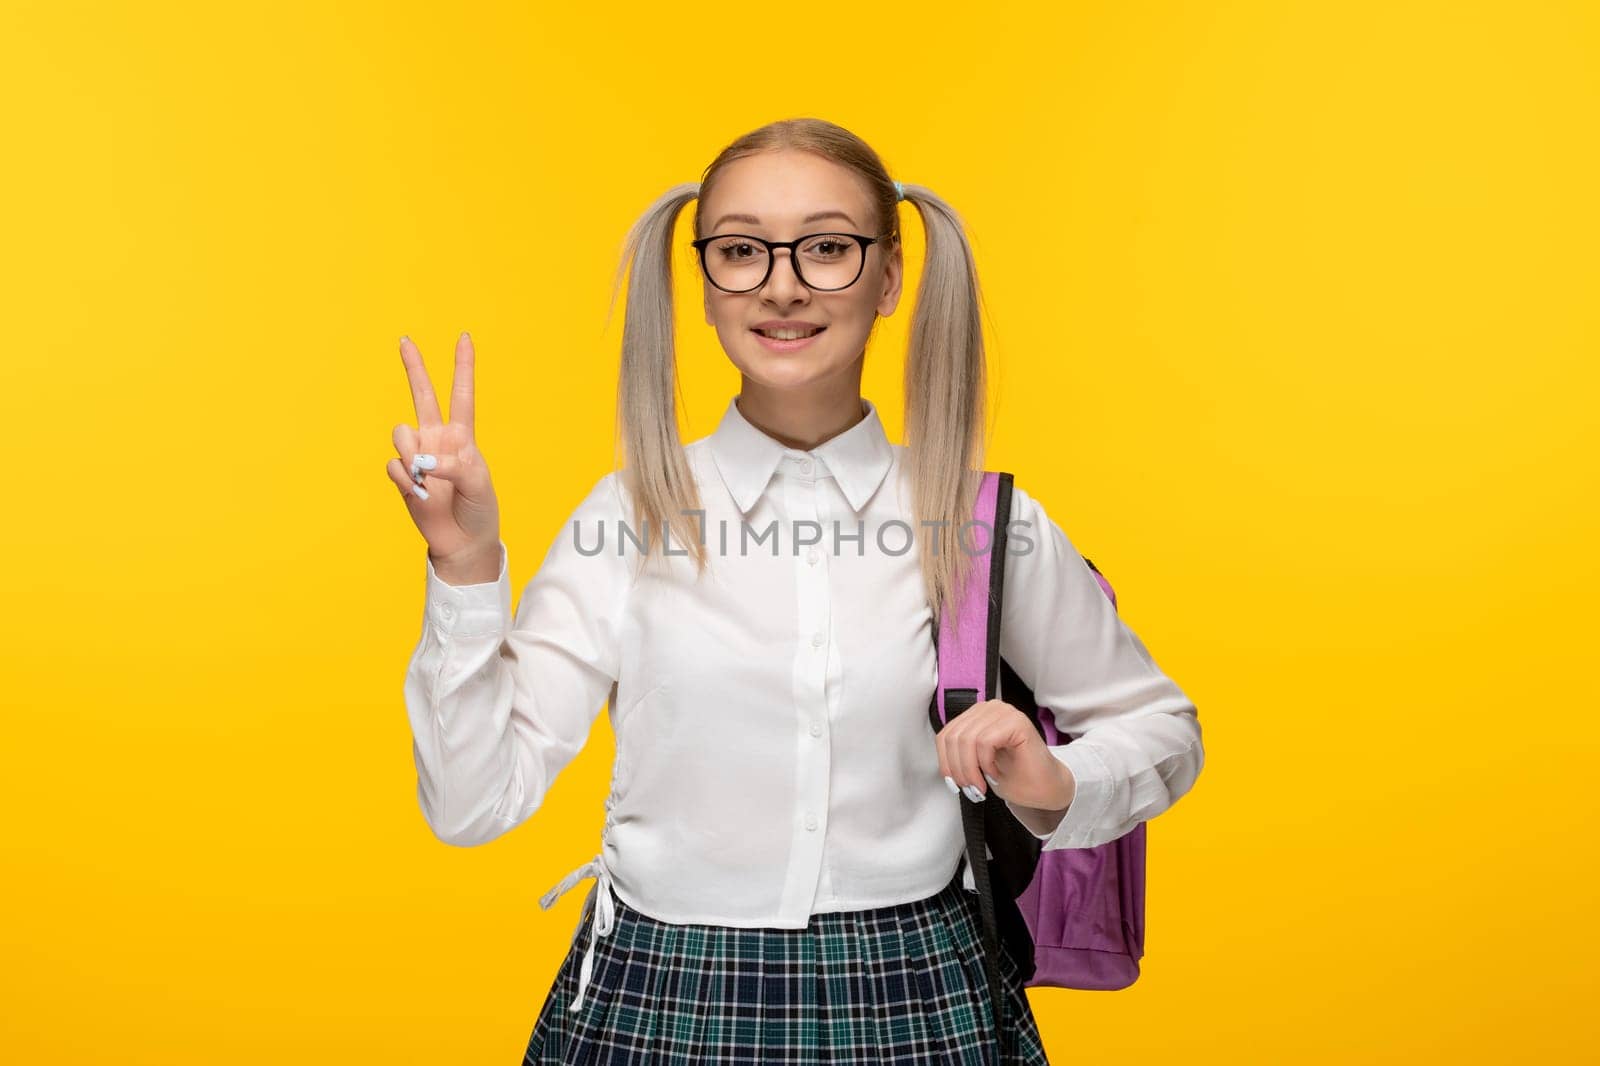 world book day blonde school girl showing peace gesture smiling with backpack